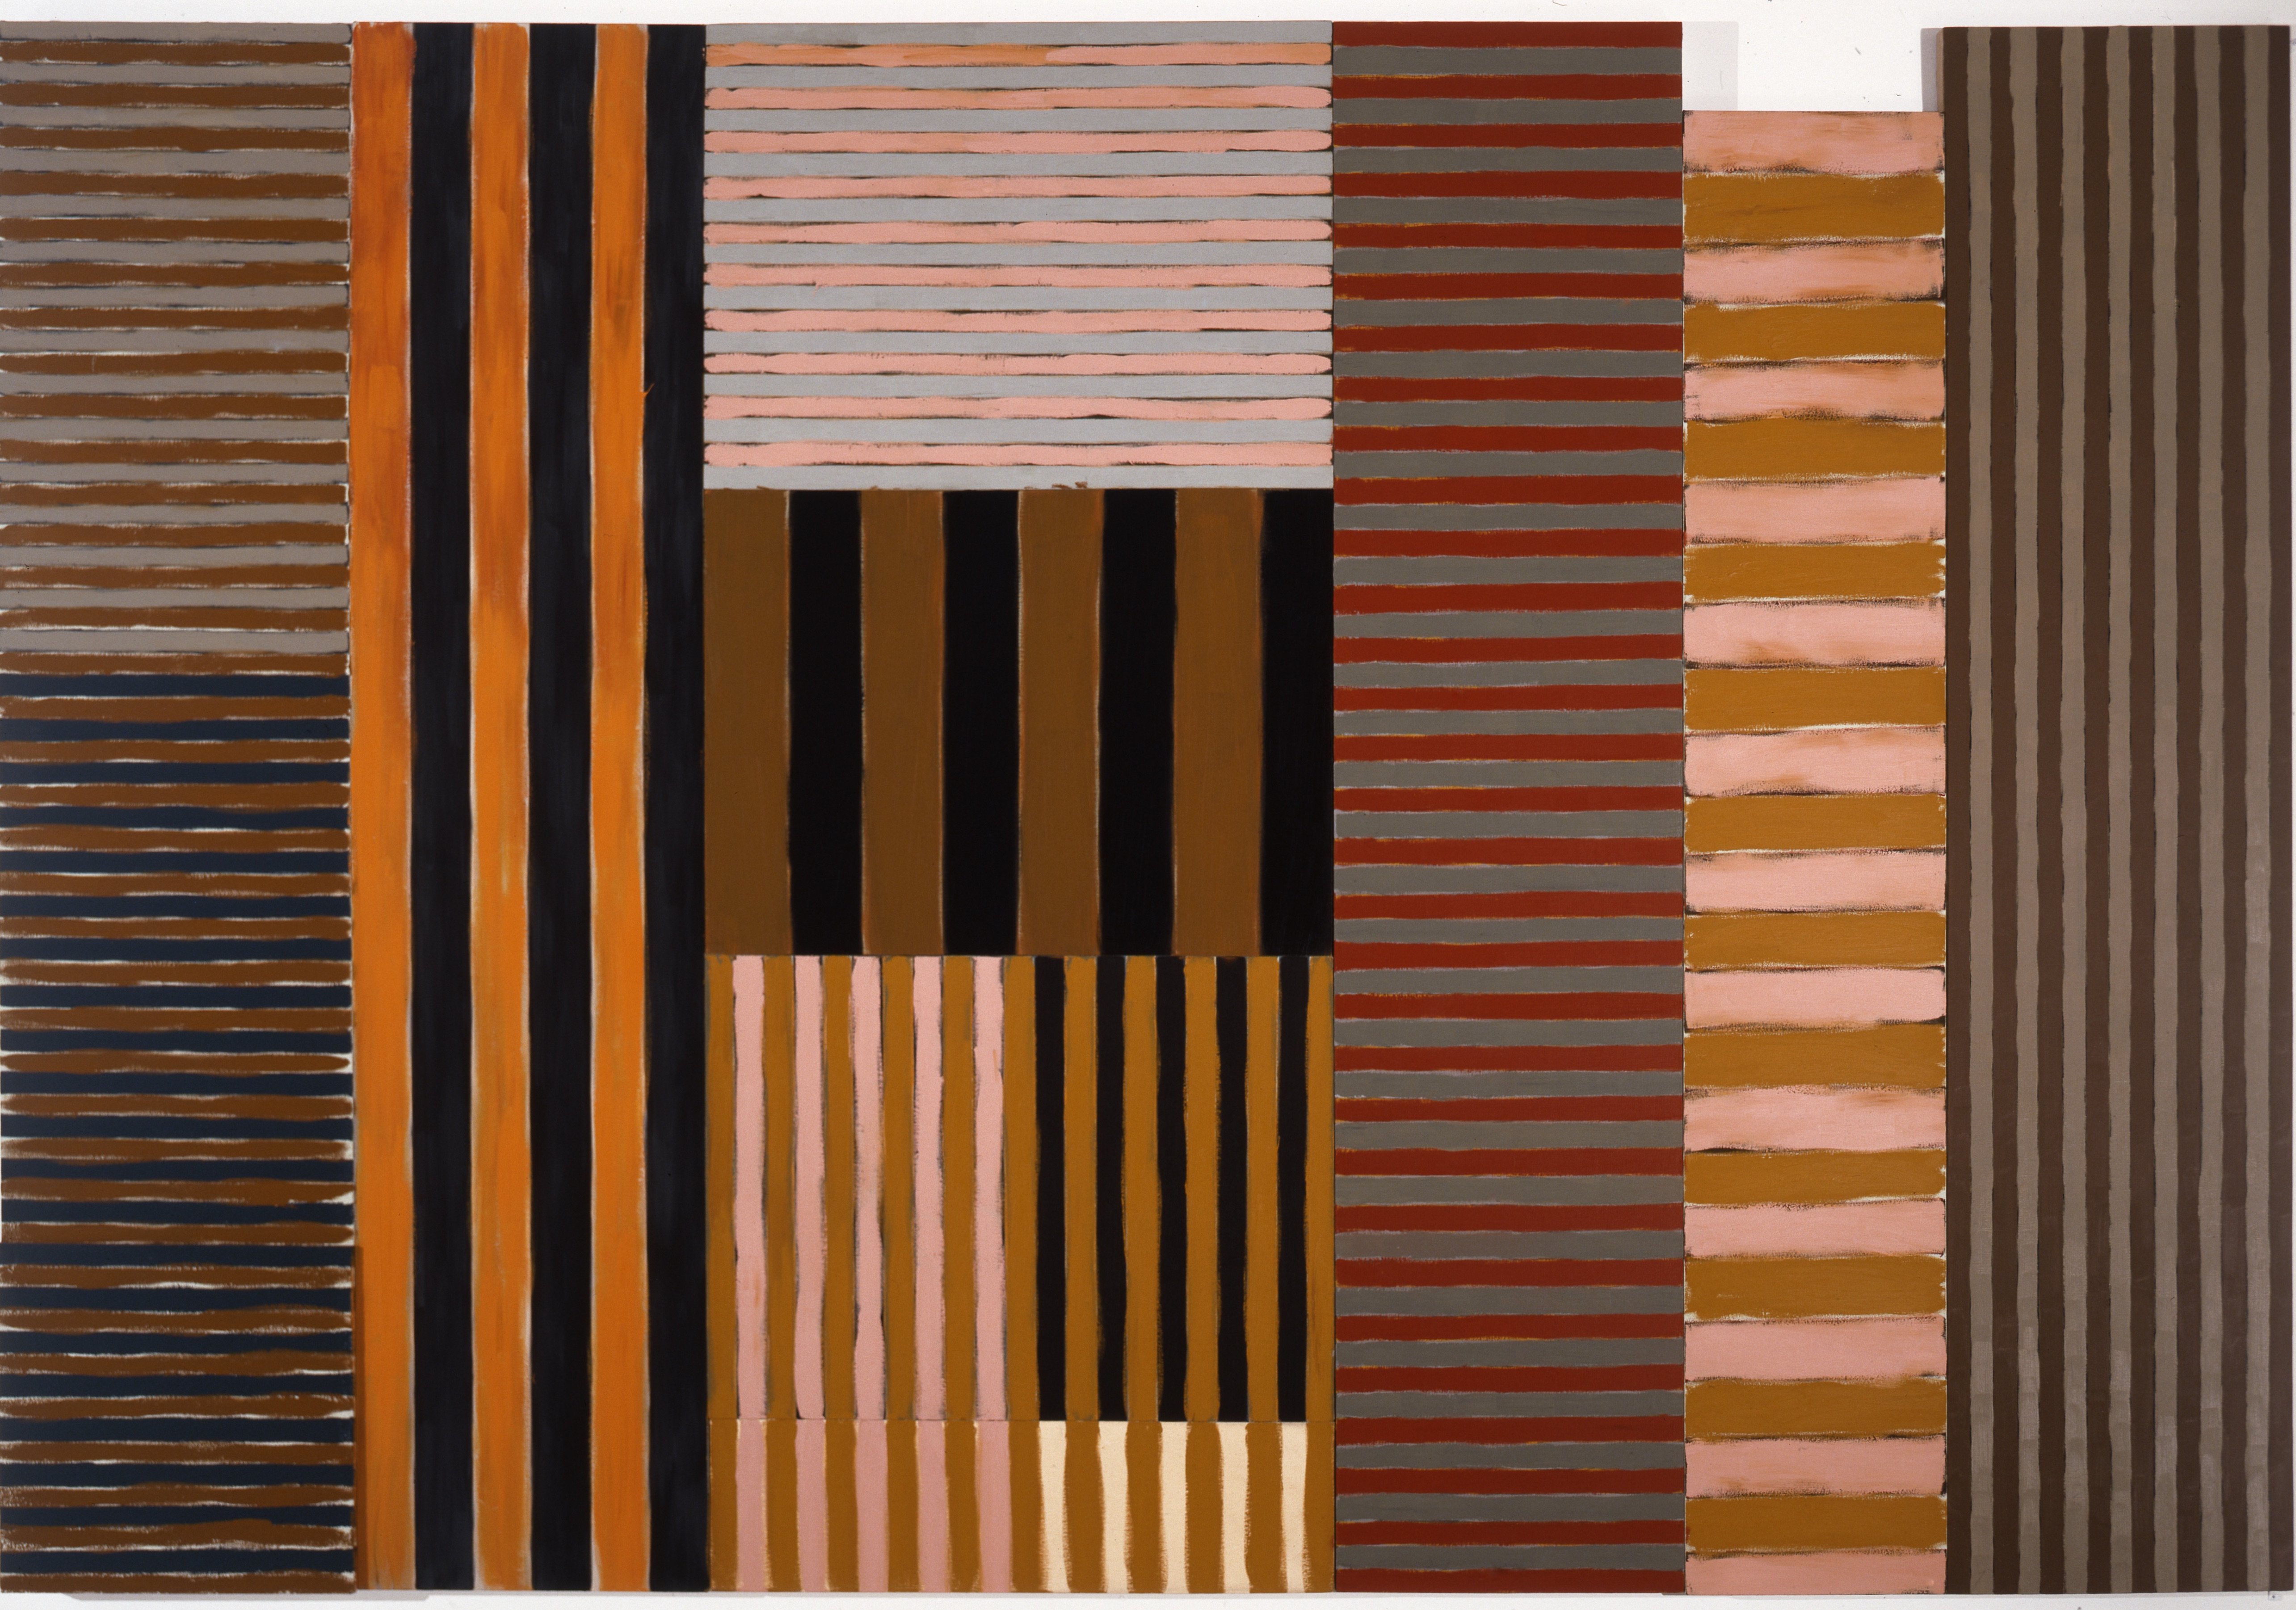 Image: Sean Scully, Adoration, 1982. Oil on canvas, linen and wood 108 x 156” (274.3 x 396.2 cm). Private collection.